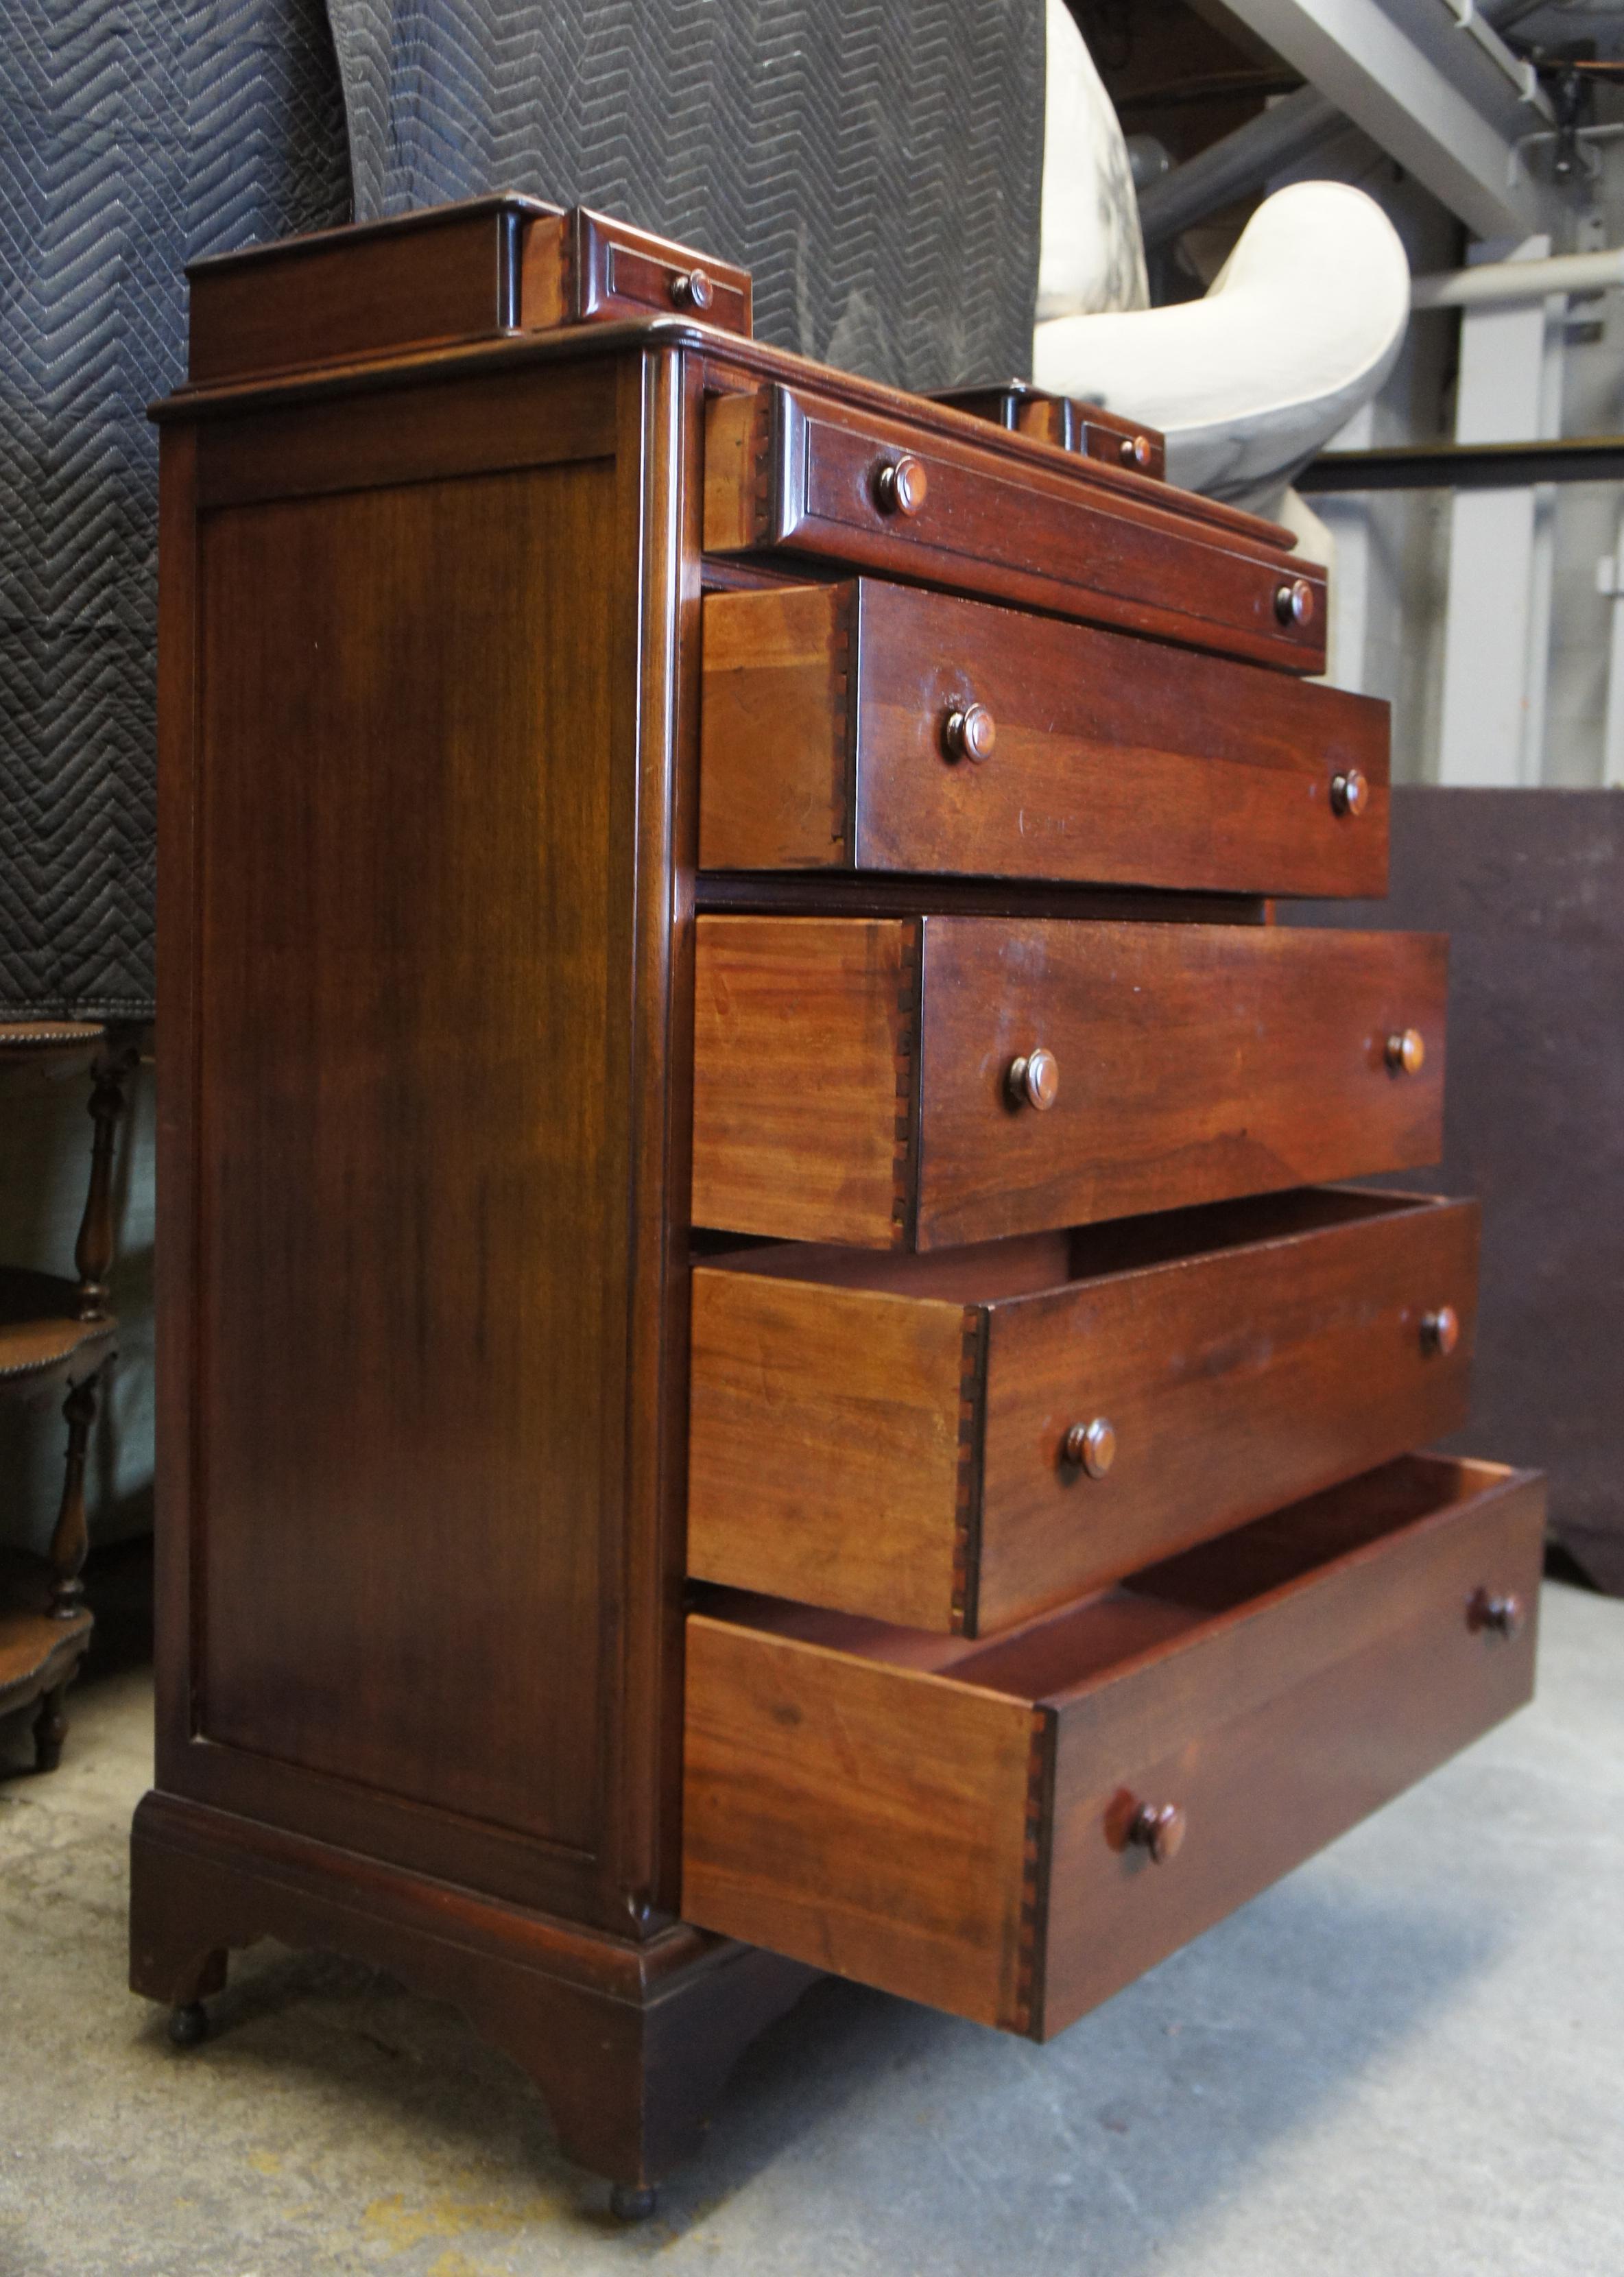 Mid-20th Century Antique Early American Mahogany Tallboy Country Dresser Chest of Drawers